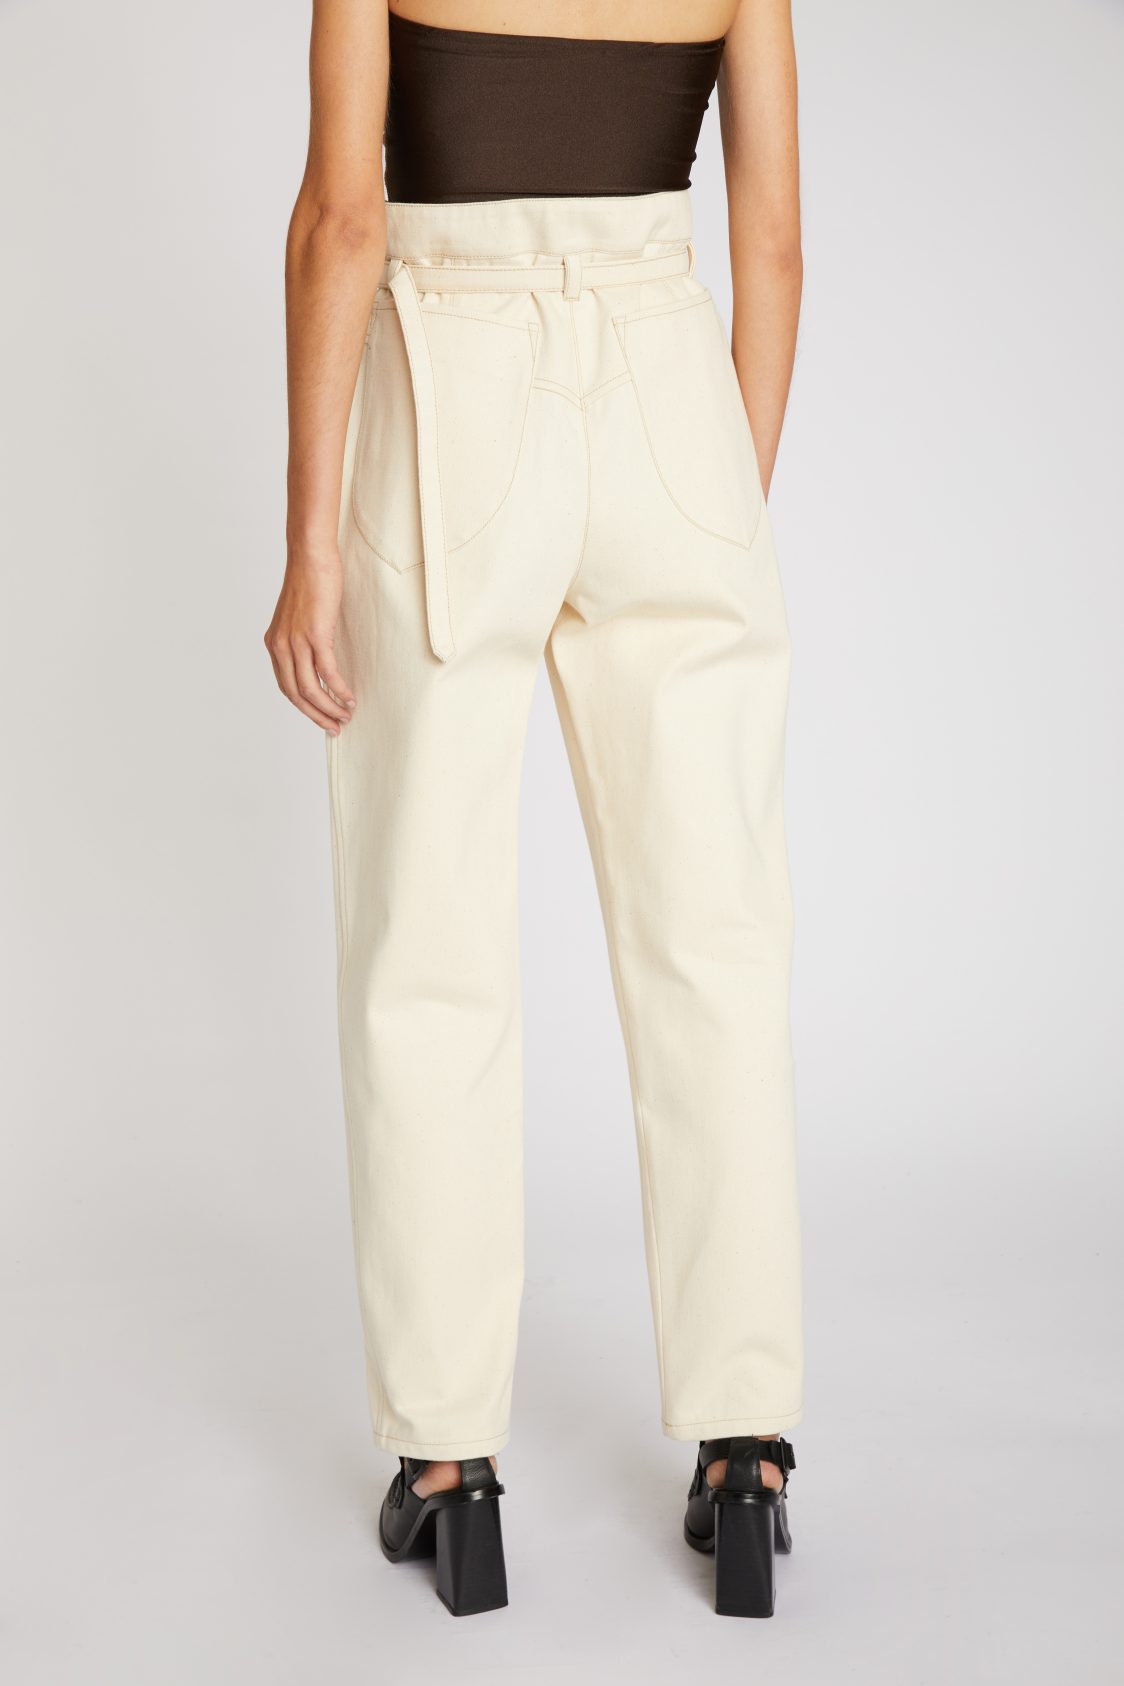 Carrot trousers in cream